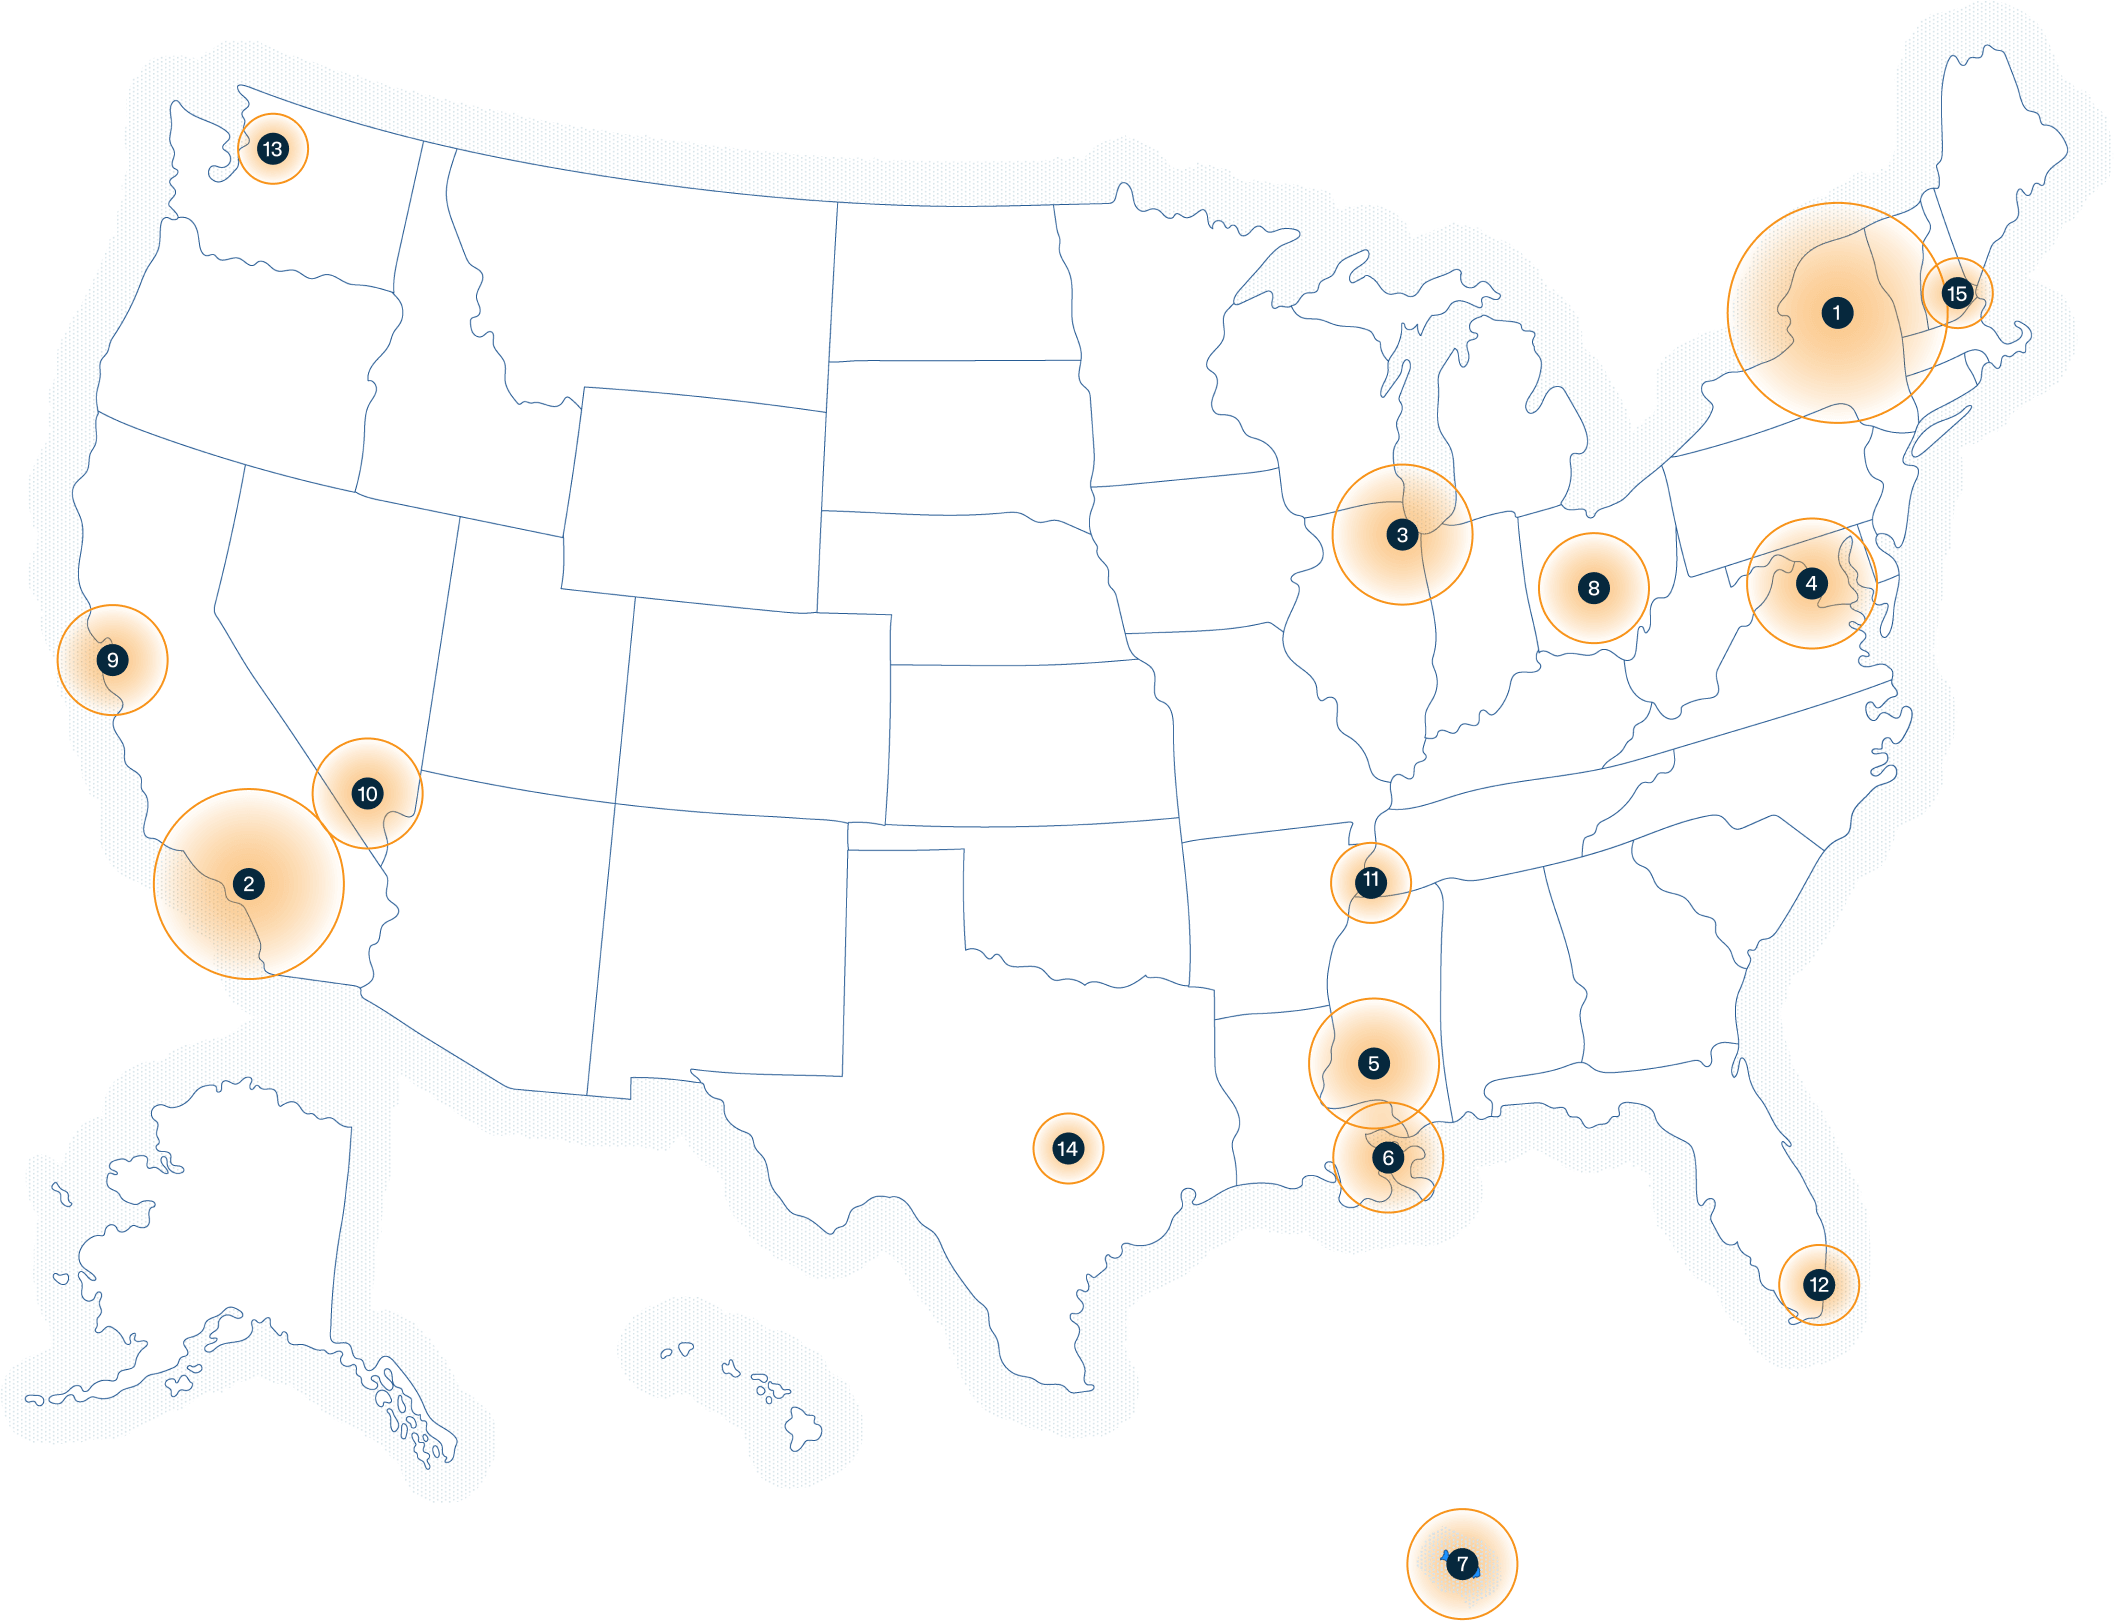 top-crypto-ready-cities-in-the-us